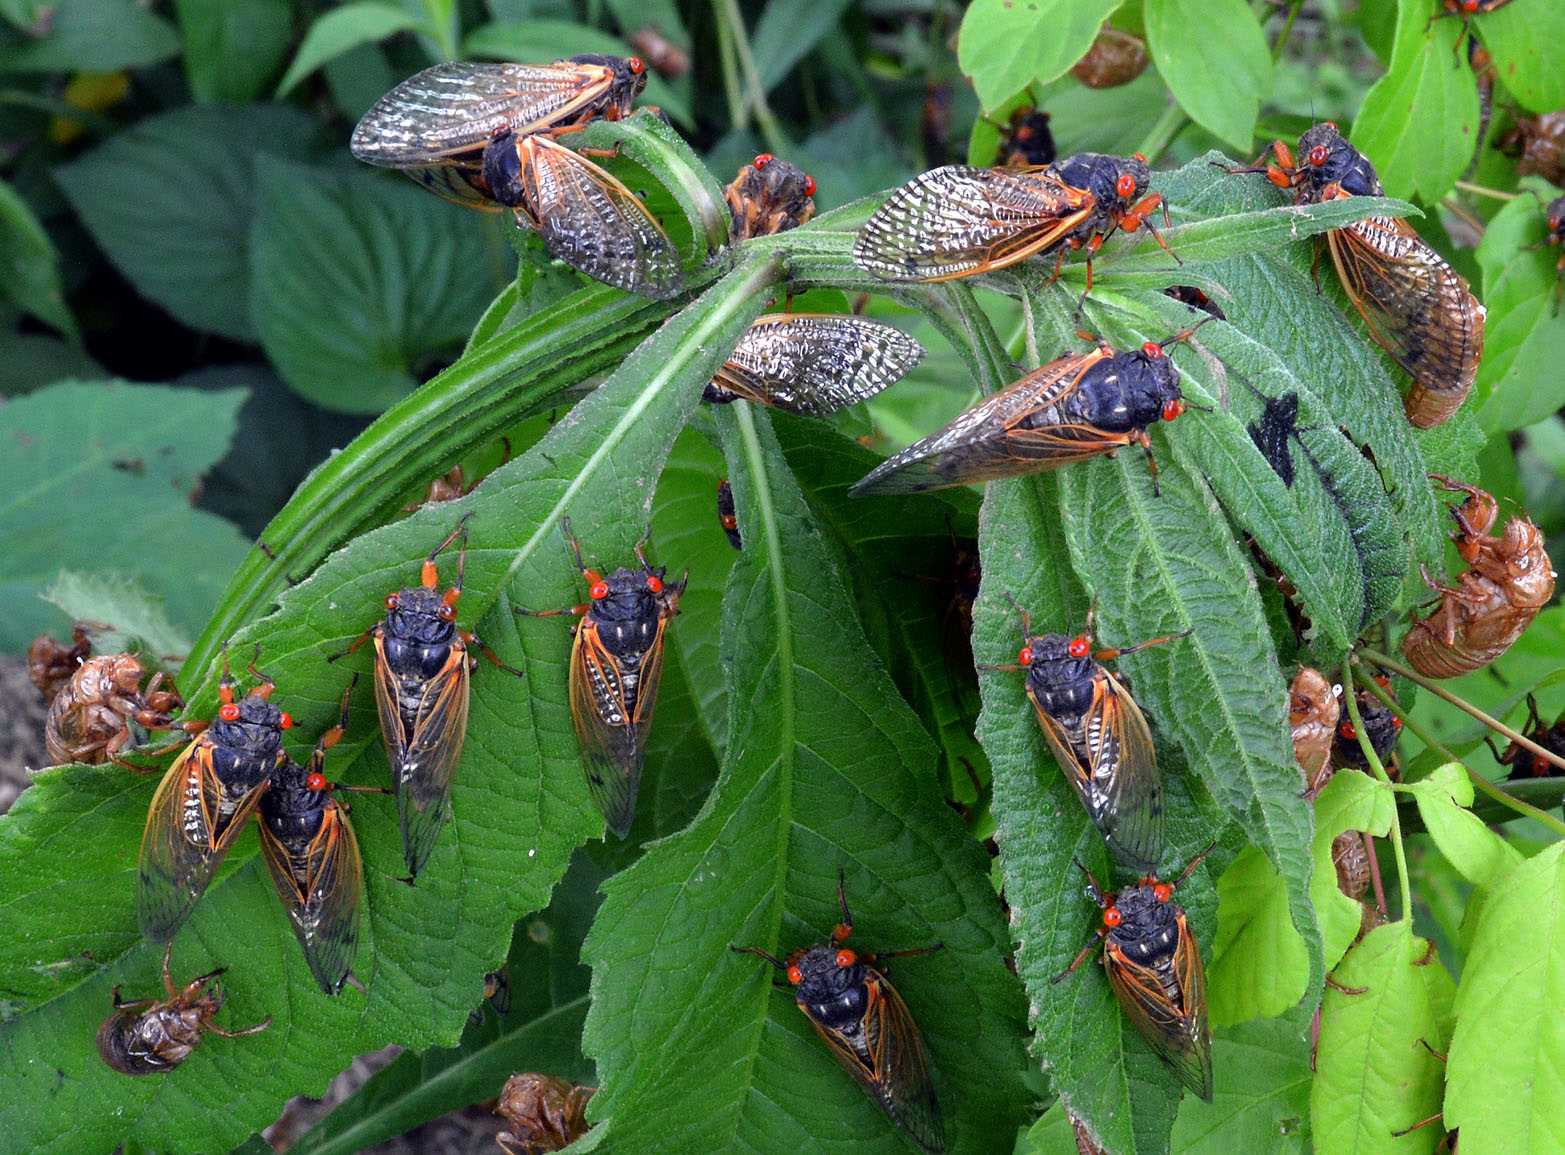 Currently, 3,378 species of cicadas have been described and named. Nine of these are periodical cicadas like the bugs pictured on these leaves. Photo by Gene Kritsky.